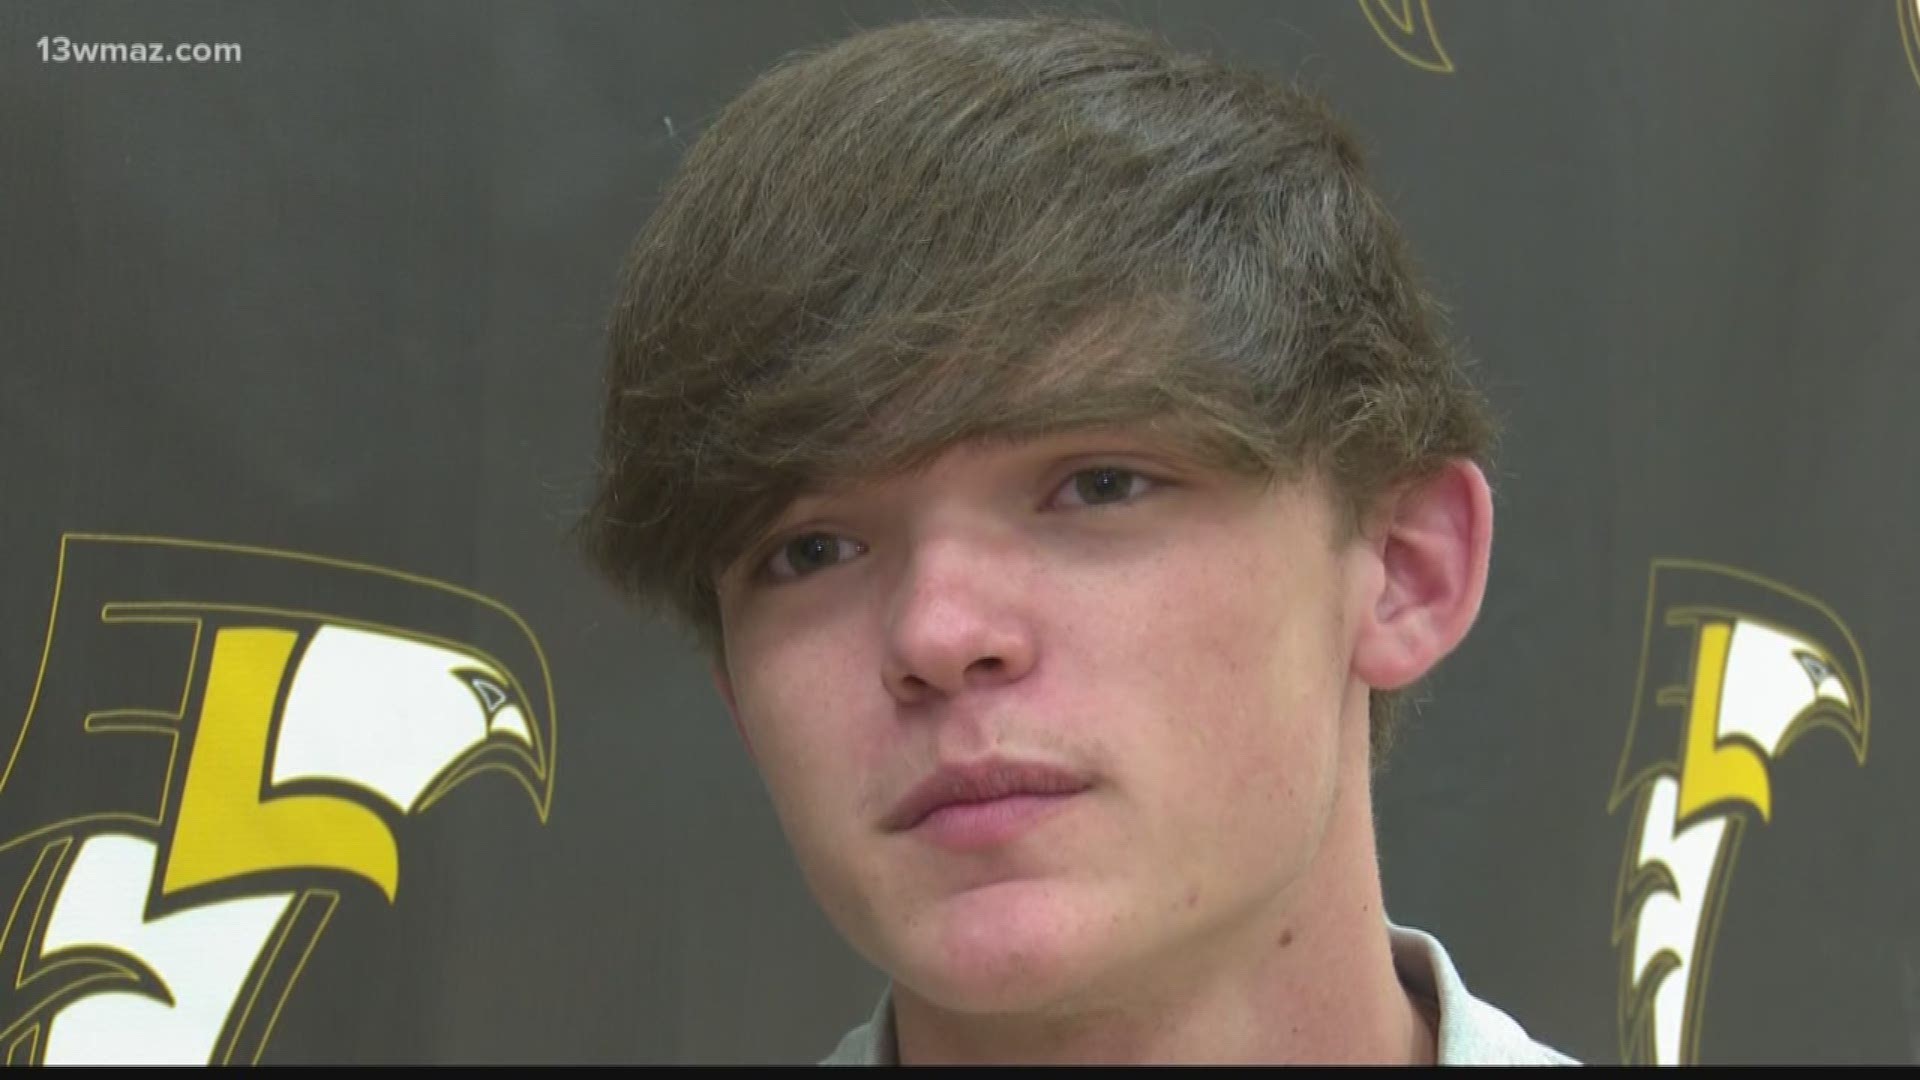 Seniors at East Laurens High School will walk across the stage this week including Bryce Evans -- a great grad we introduced you to last week whose story has gained national attention on social media.